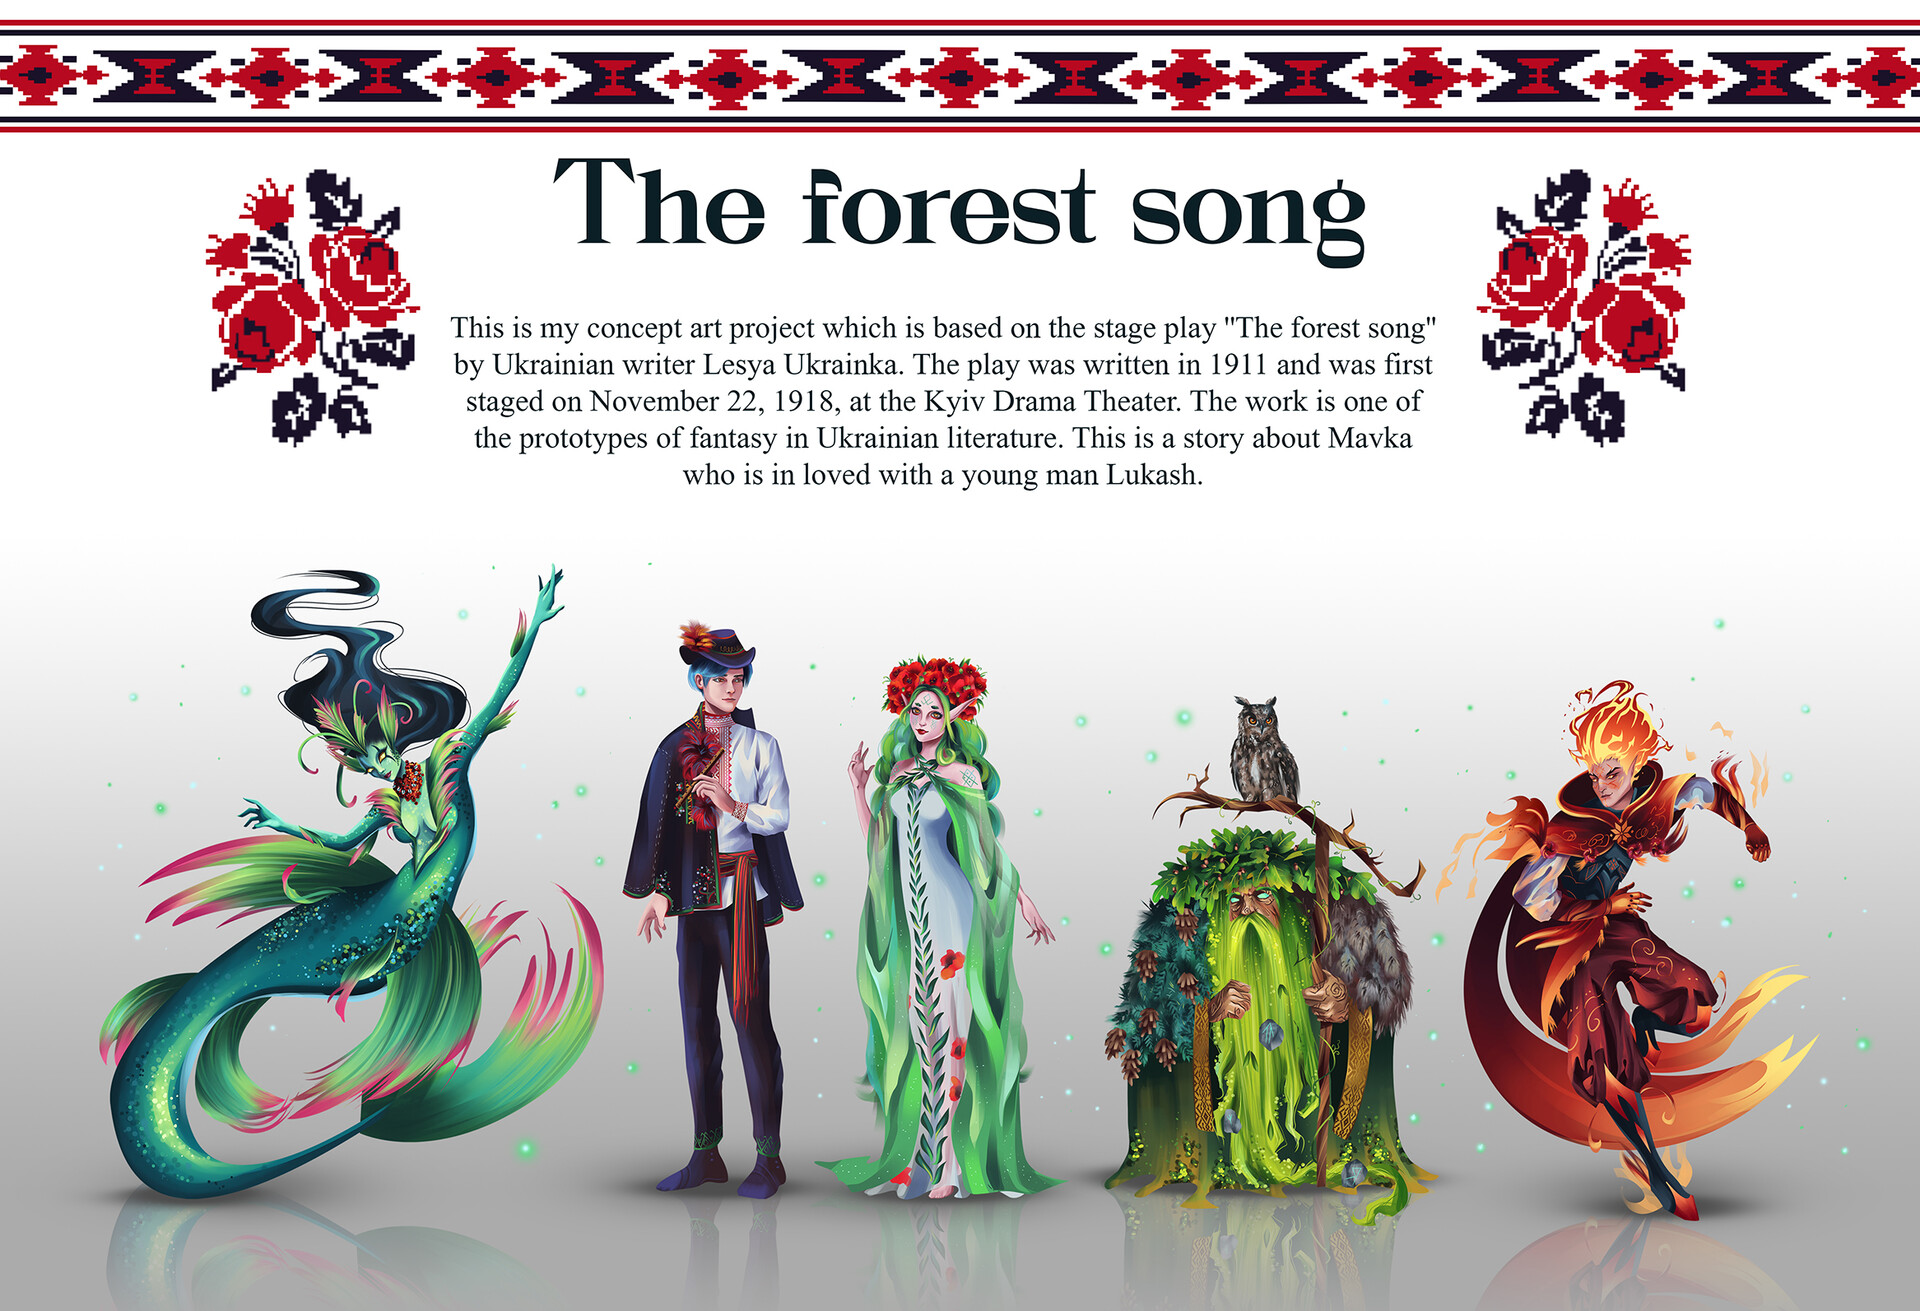 ArtStation - The forest song